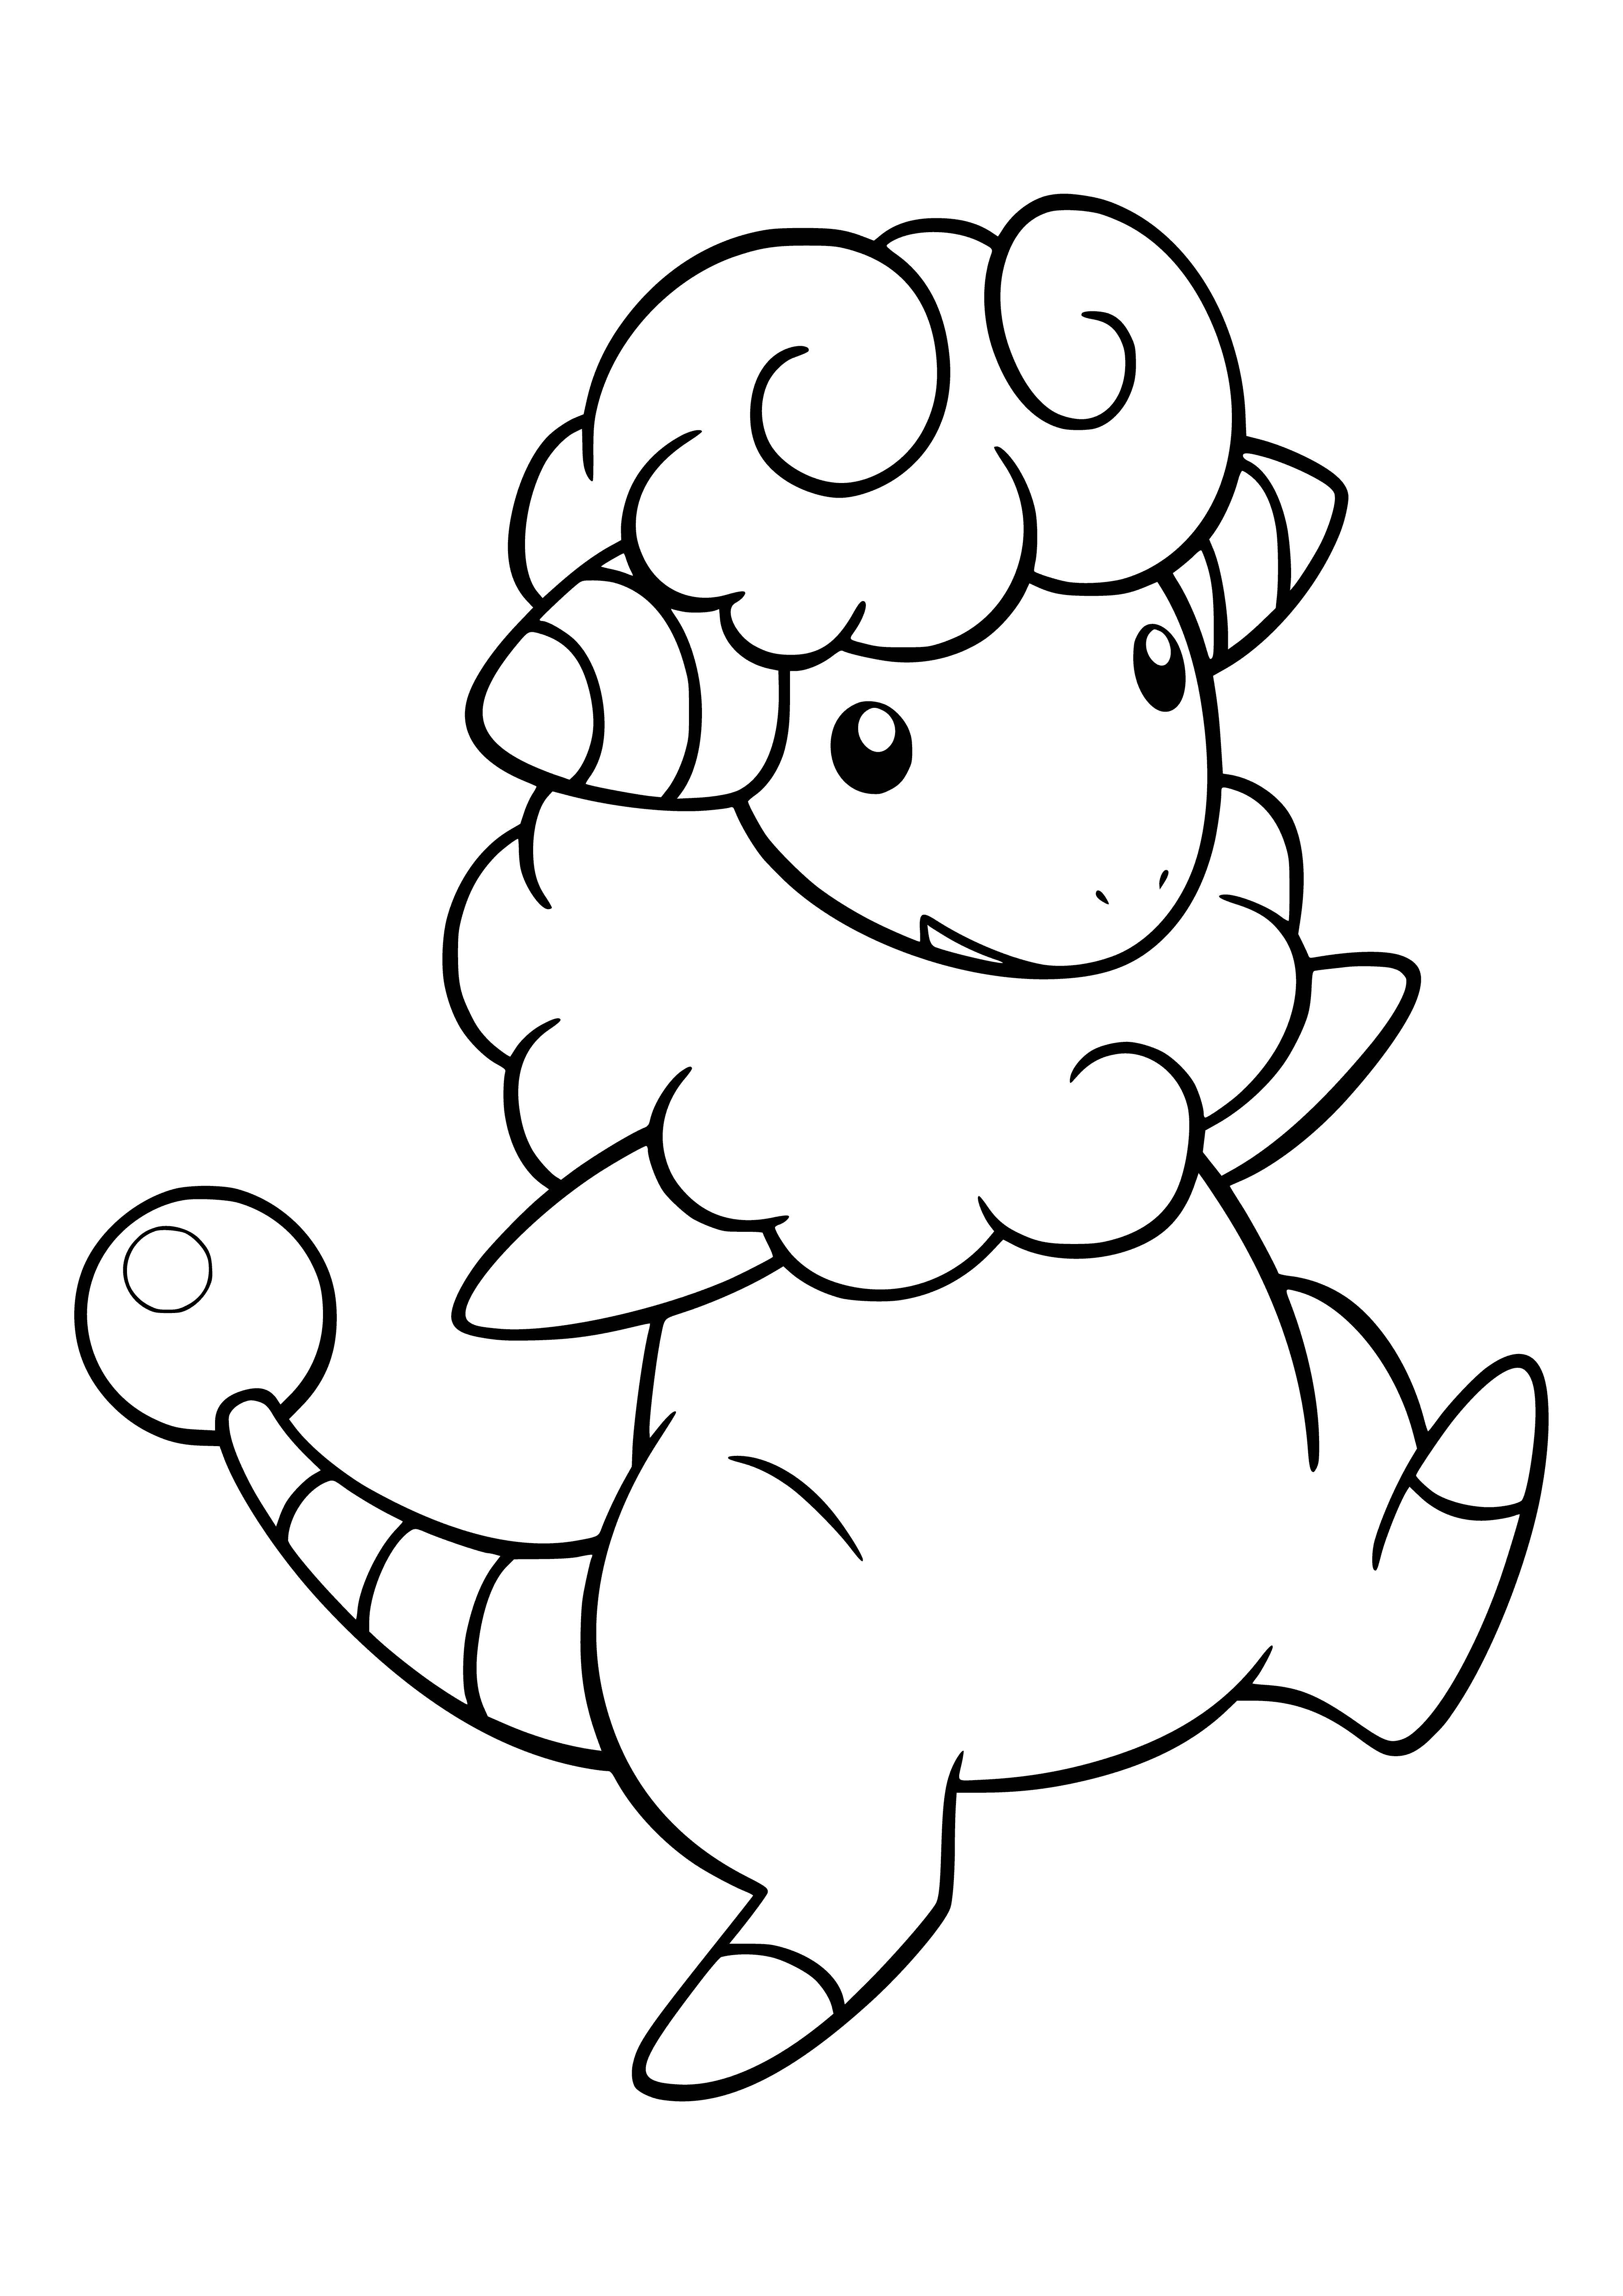 coloring page: Flaaffy is a sheep Pokemon evolution with blue tail, yellow horns and pink body, which can use stored electricity to shock foes.